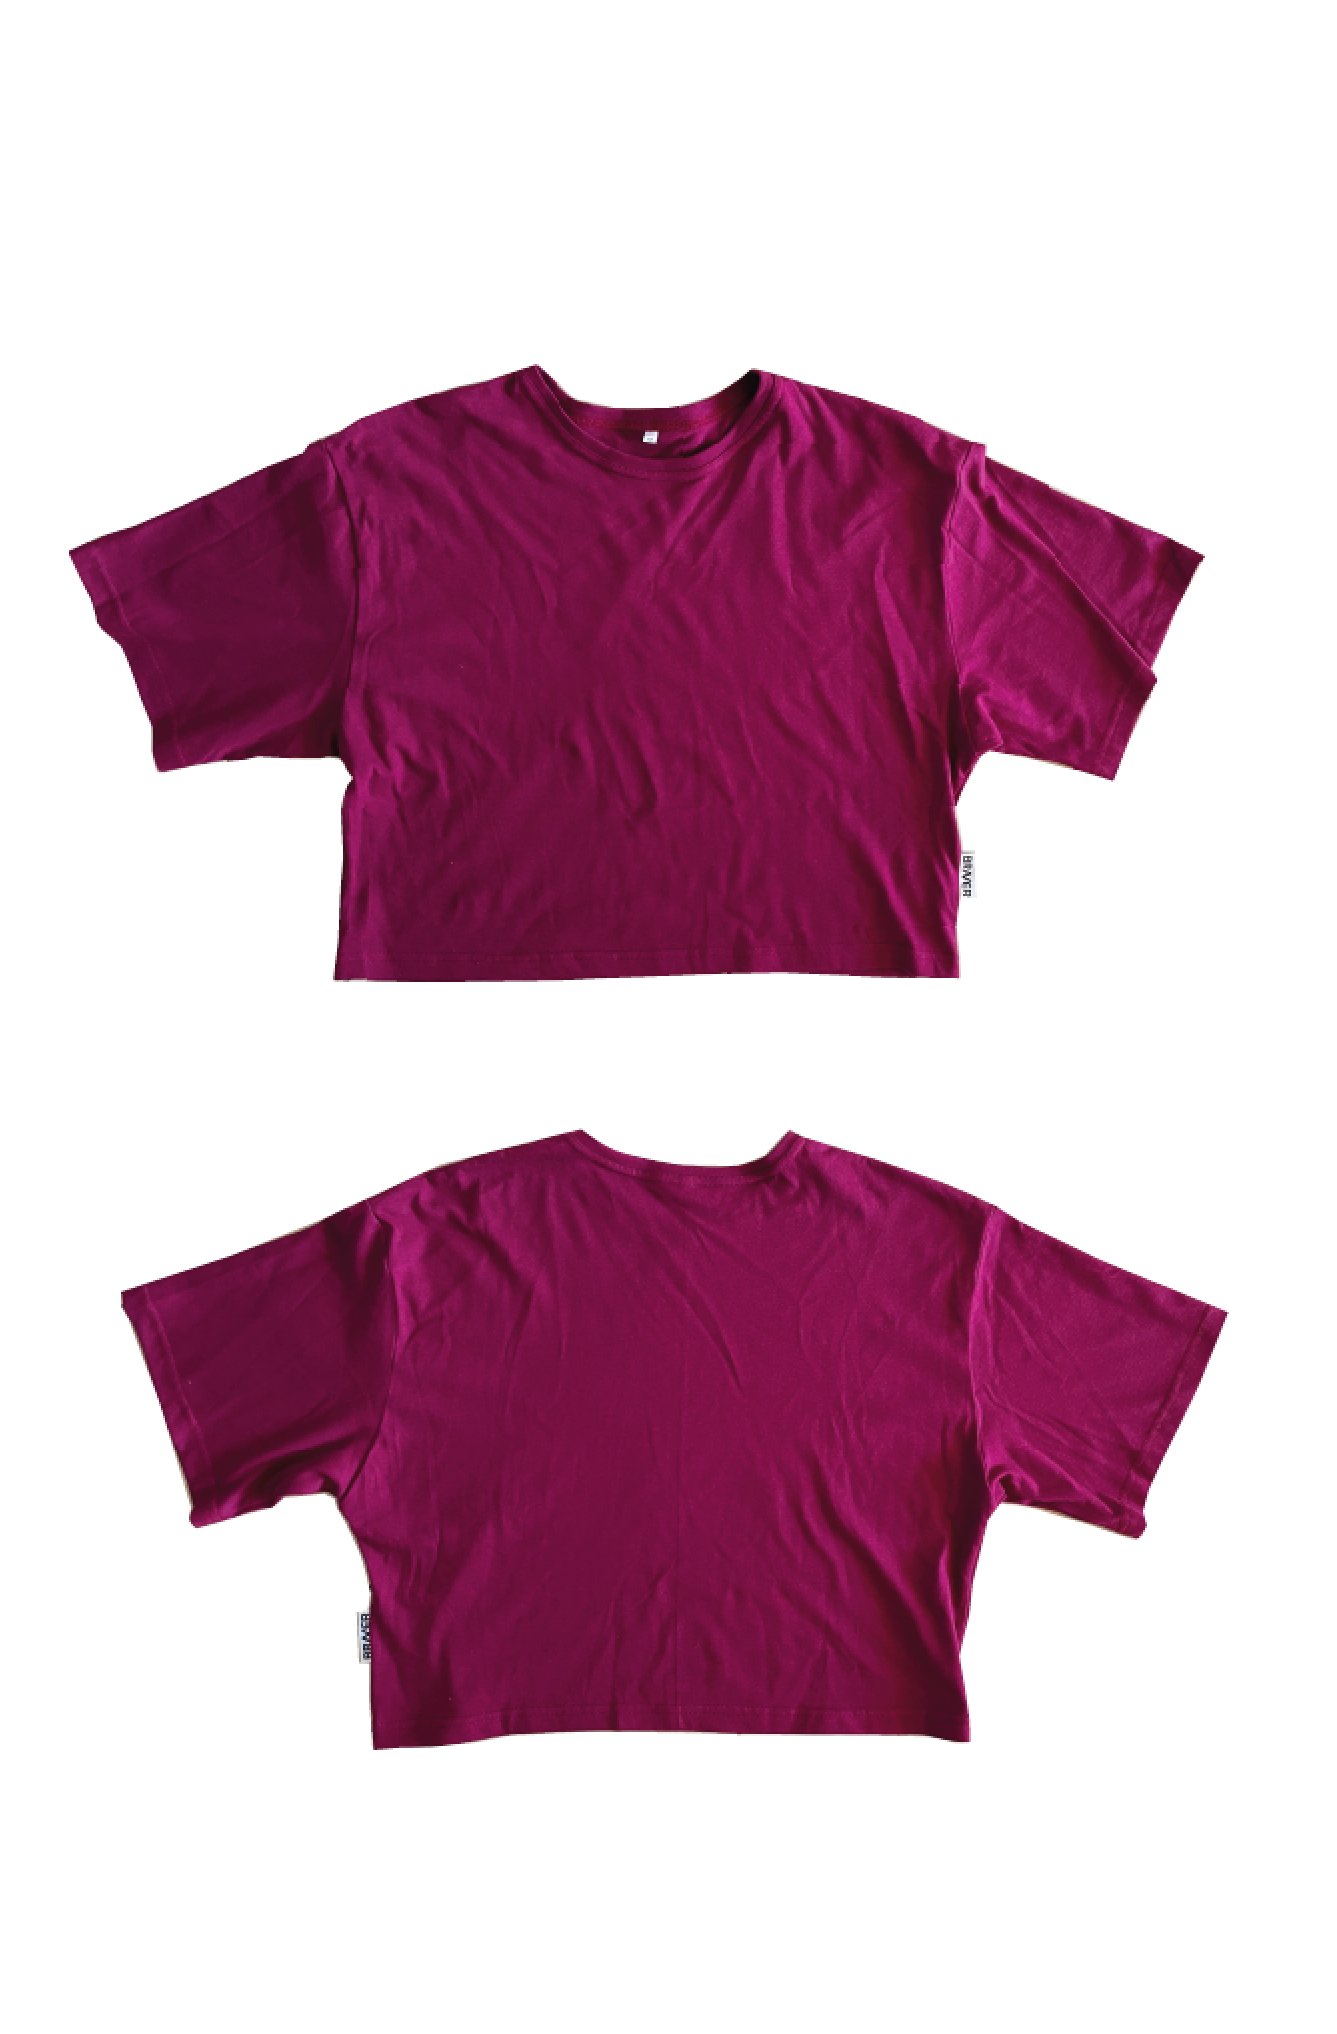 Showing the front and back of a blank maroon coloured crop top